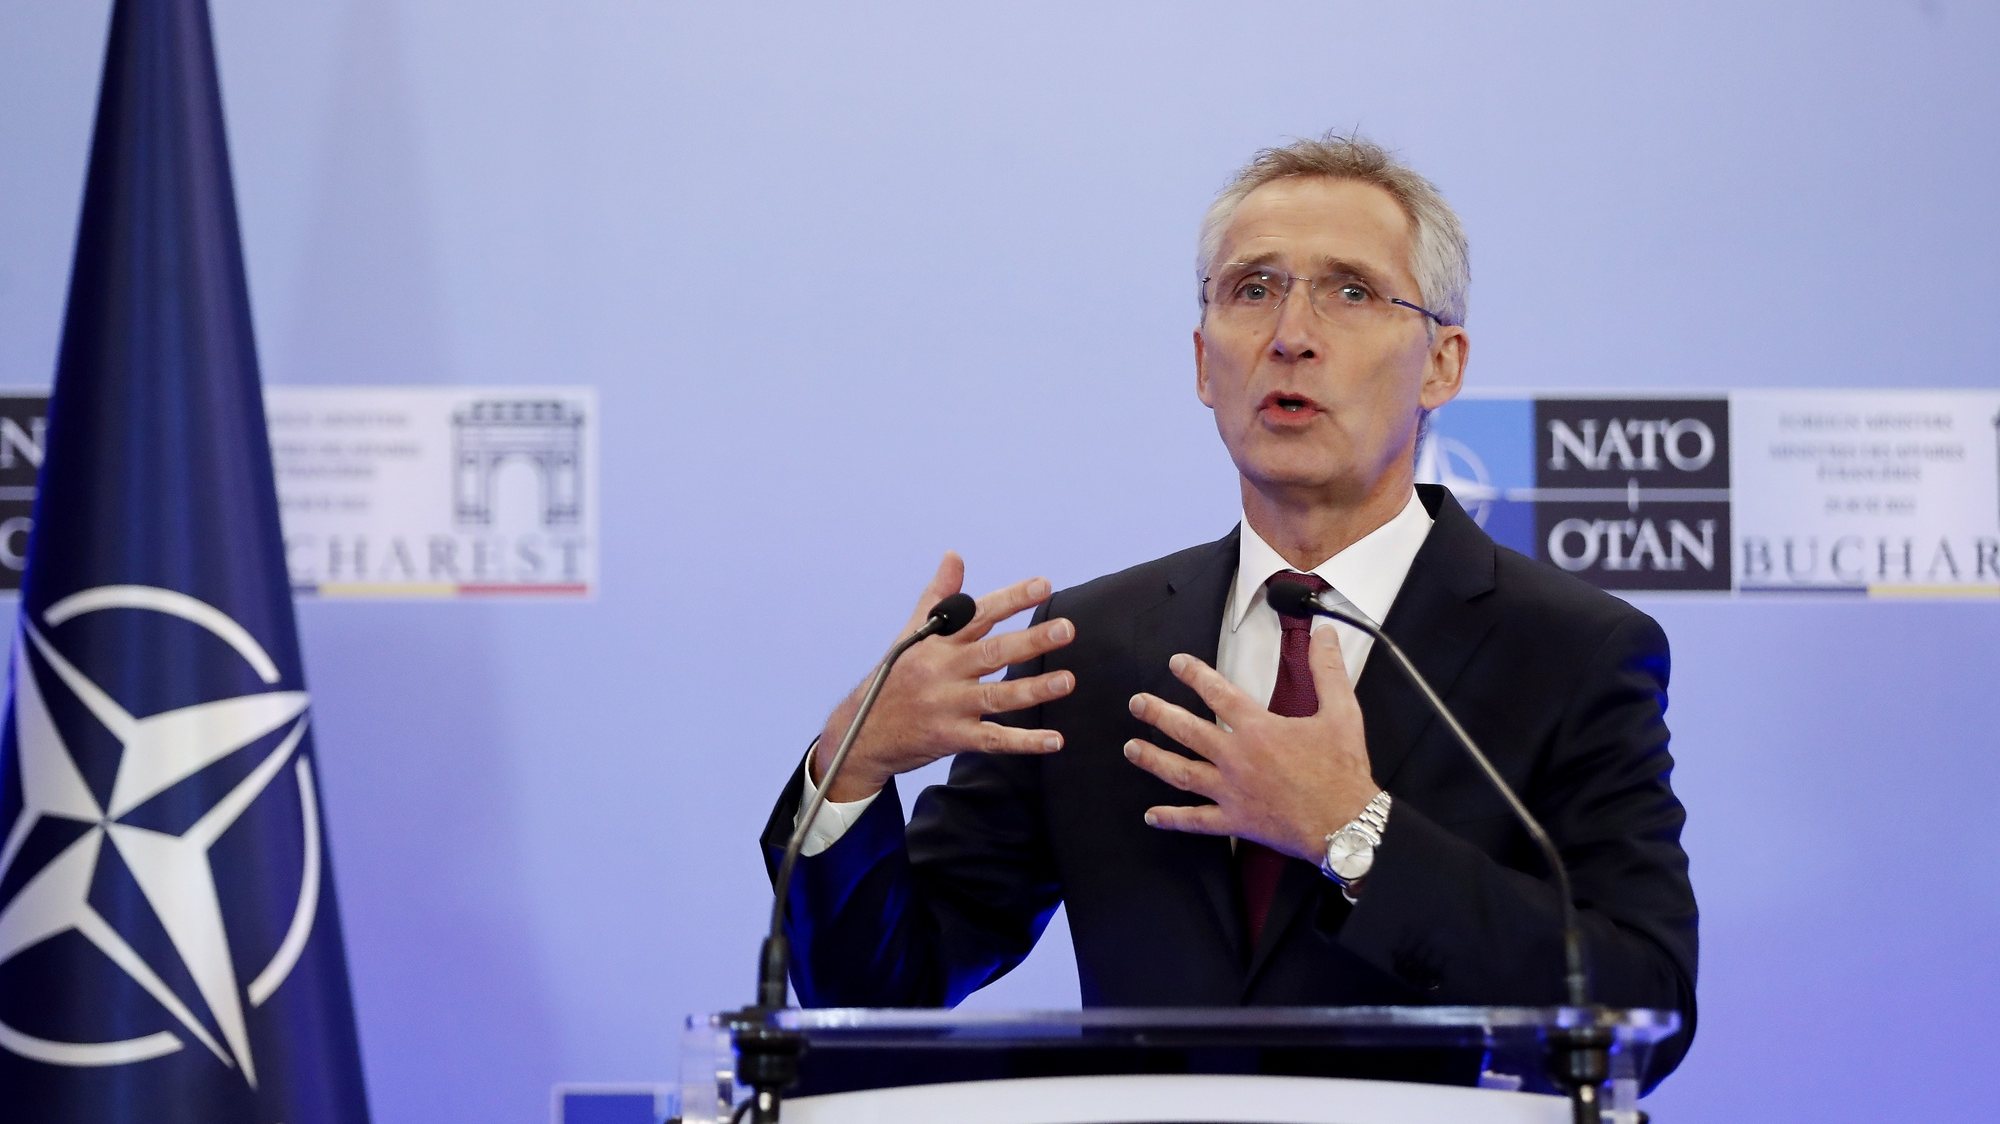 epa10338777 NATO Secretary General Jens Stoltenberg speaks during a press conference at the end of the NATO Foreign Ministers Meeting held at Parliament Palace in Bucharest, Romania, 30 November 2022. Foreign Ministers from NATO countries gathered in Romania&#039;s capital on 29 and 30 November 2022 to tackle Russia’s invasion in Ukraine, NATO’s support for Kyiv administration and regional partners and to find new ways to strengthen the Eastern flank of the alliance.  EPA/ROBERT GHEMENT